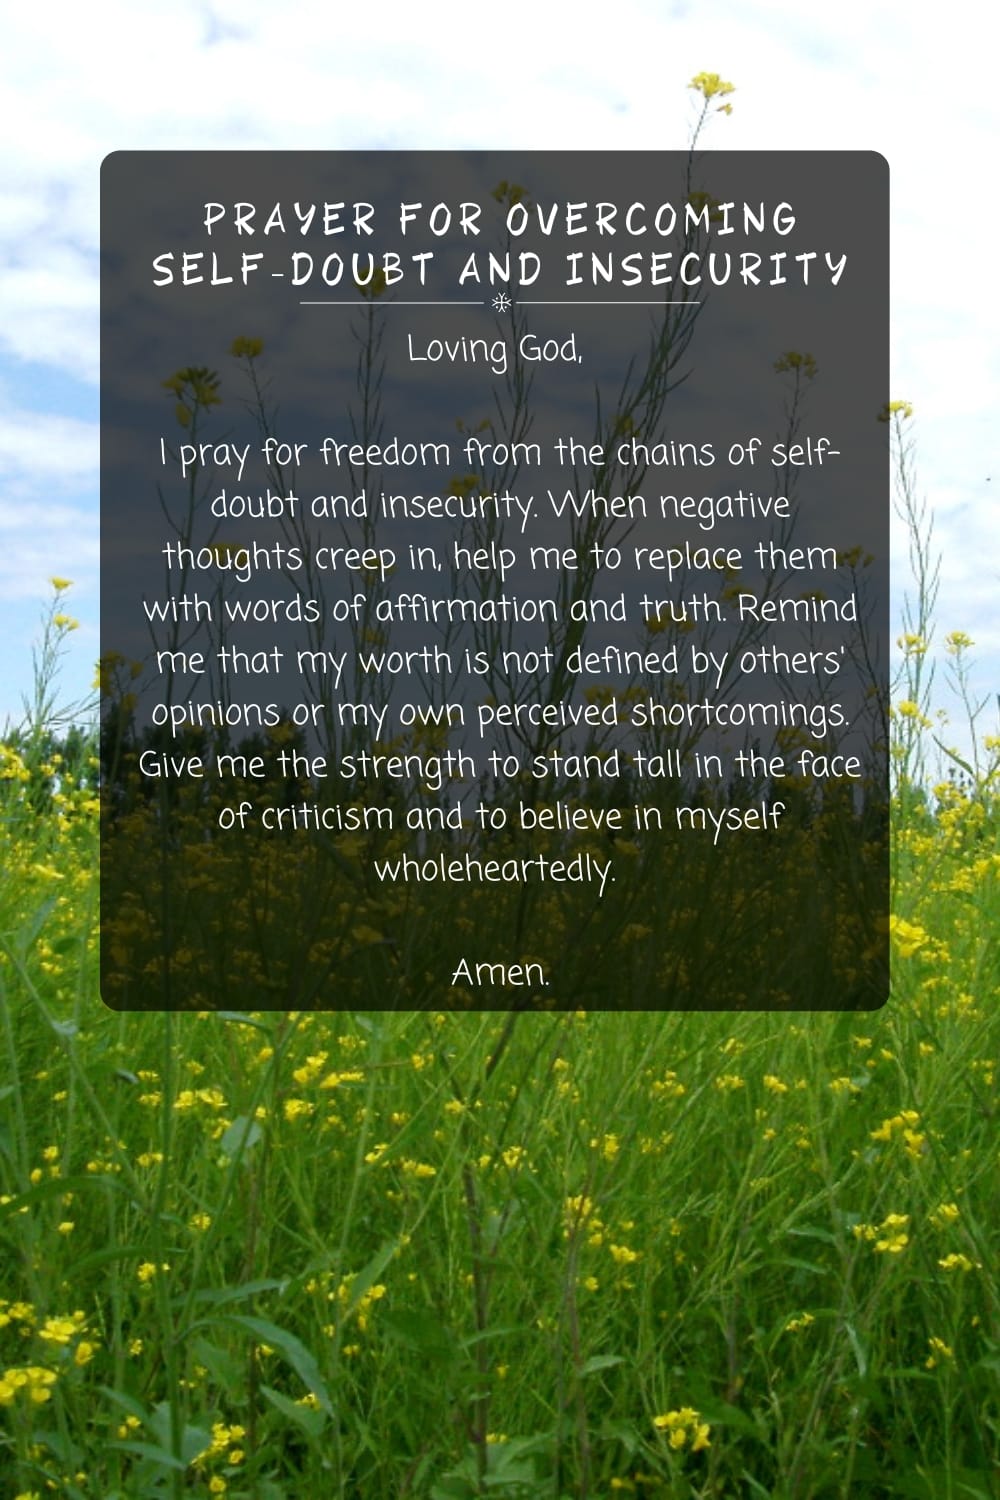 Prayer for Overcoming Self-Doubt and Insecurity